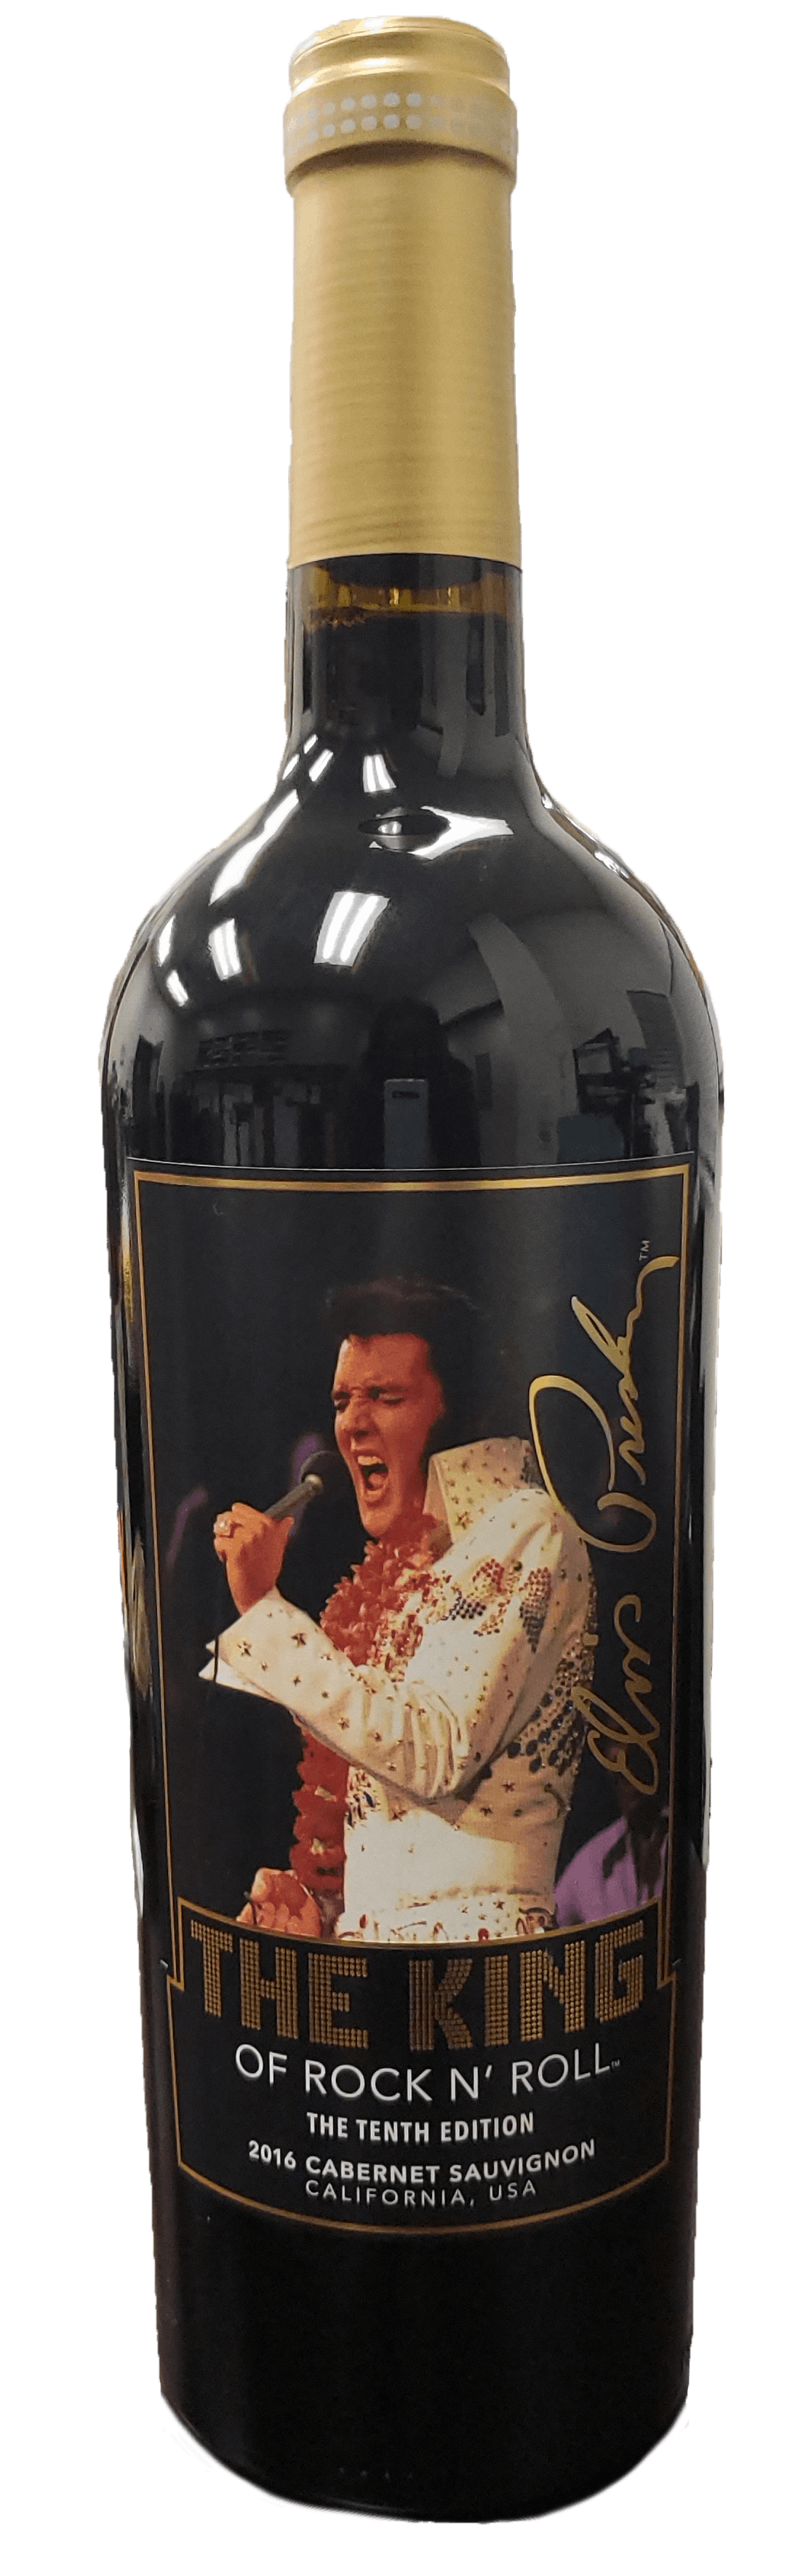 Graceland Cellars Elvis Presley The King Of Rock 'n Roll Cabernet Sauvignon 2016 750ml - Buster's Liquors & Wines